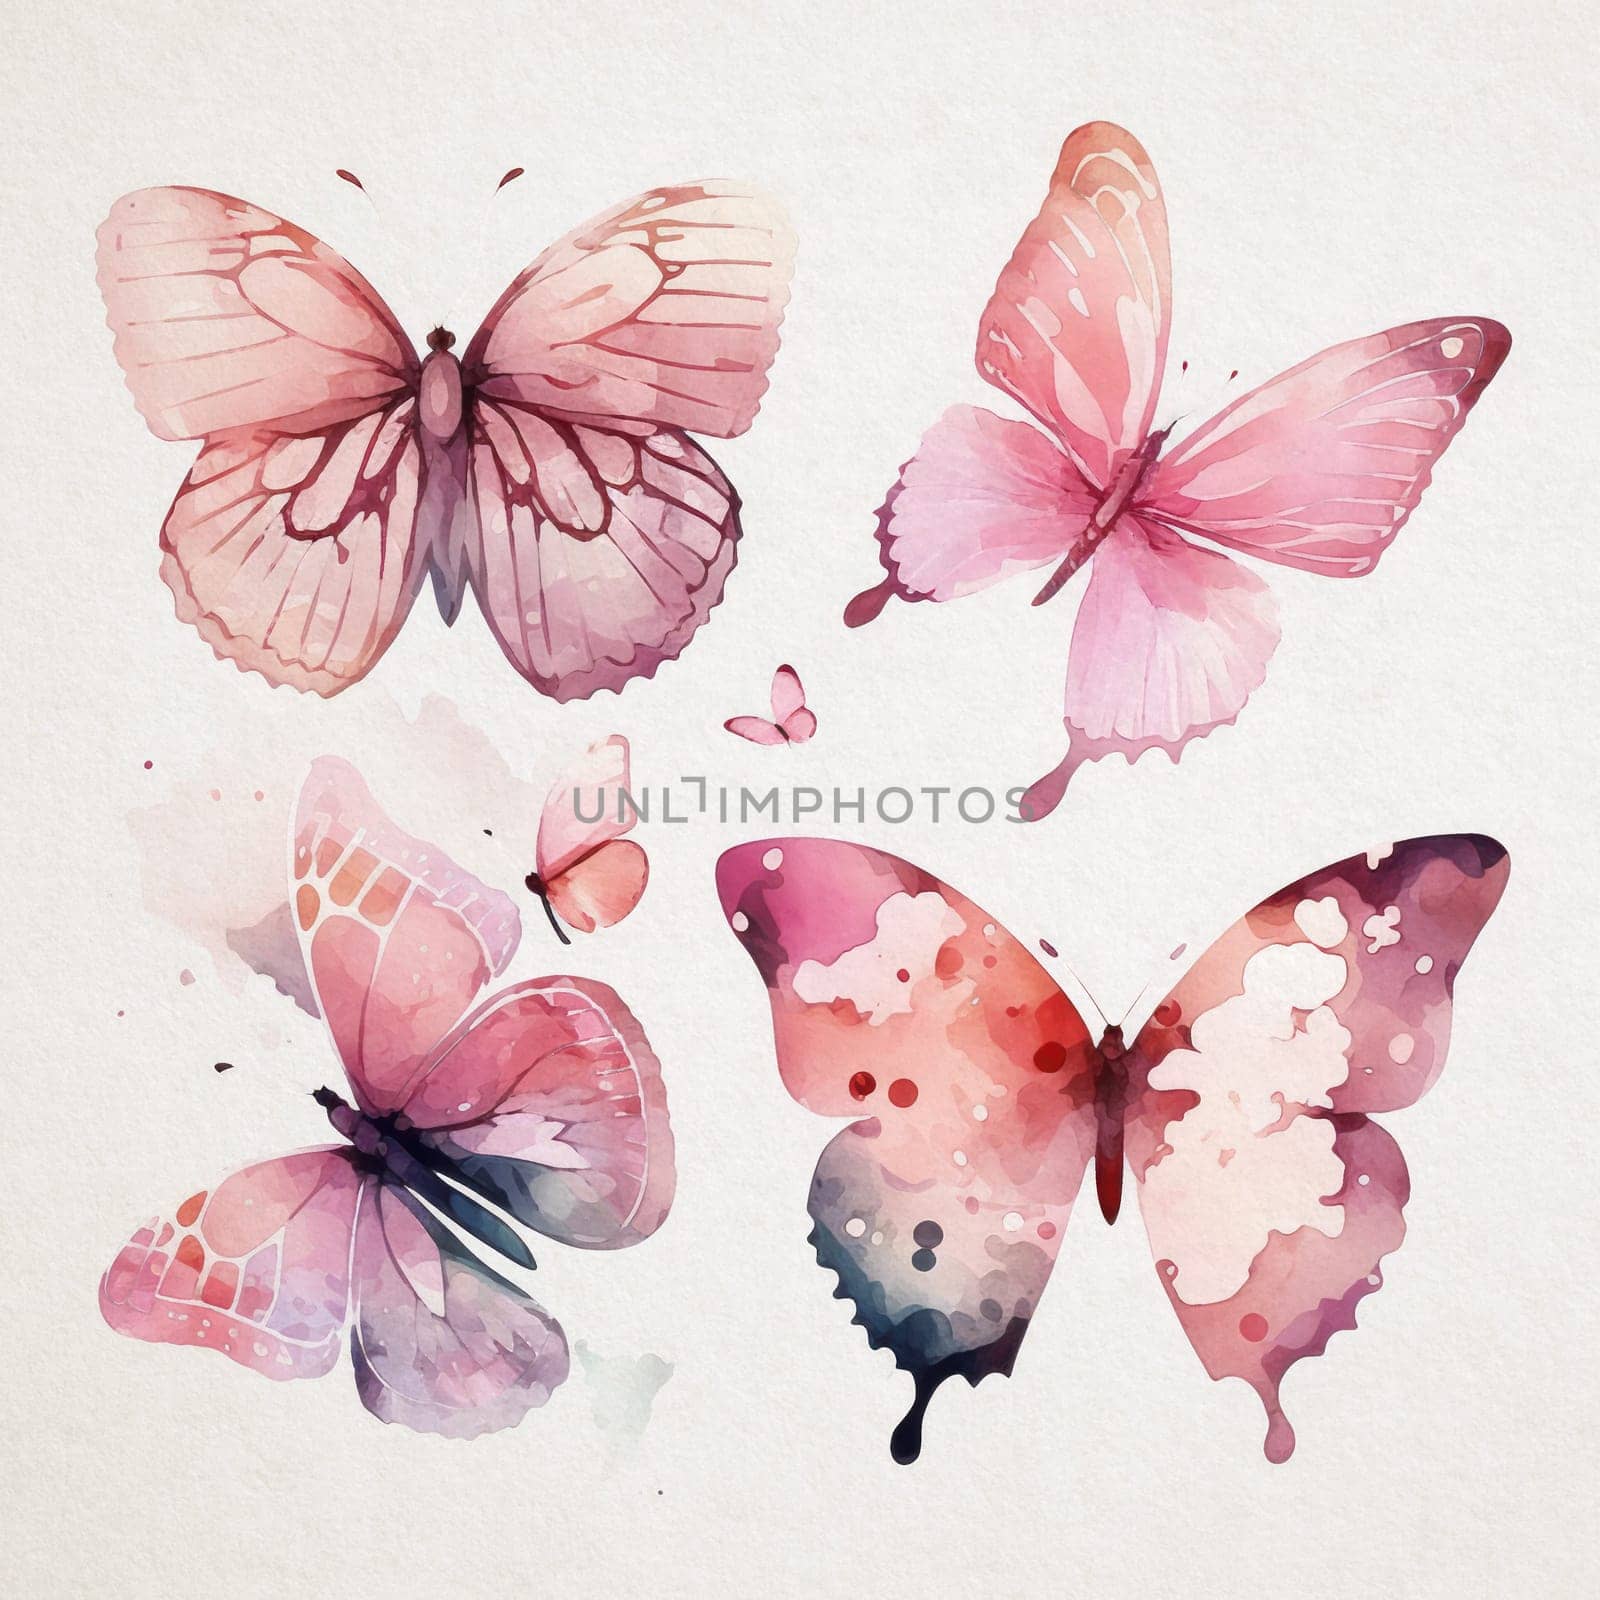 Collection of watercolor butterflies in shades of pink on a white paper background by igor010